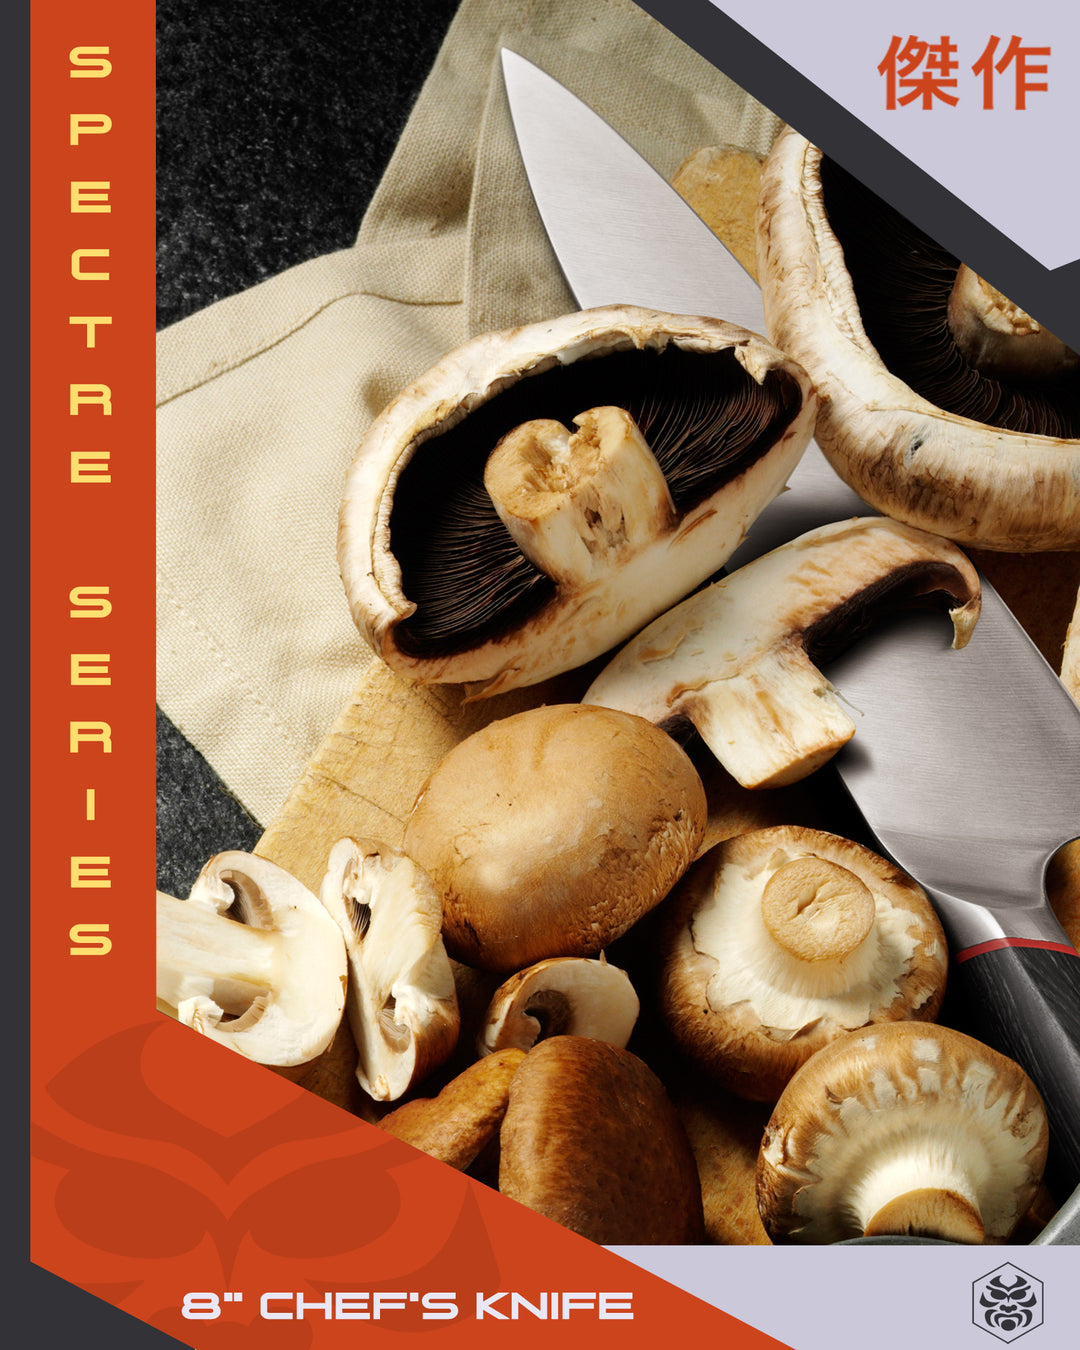 The Spectre Chef's Knife among sliced mushrooms.